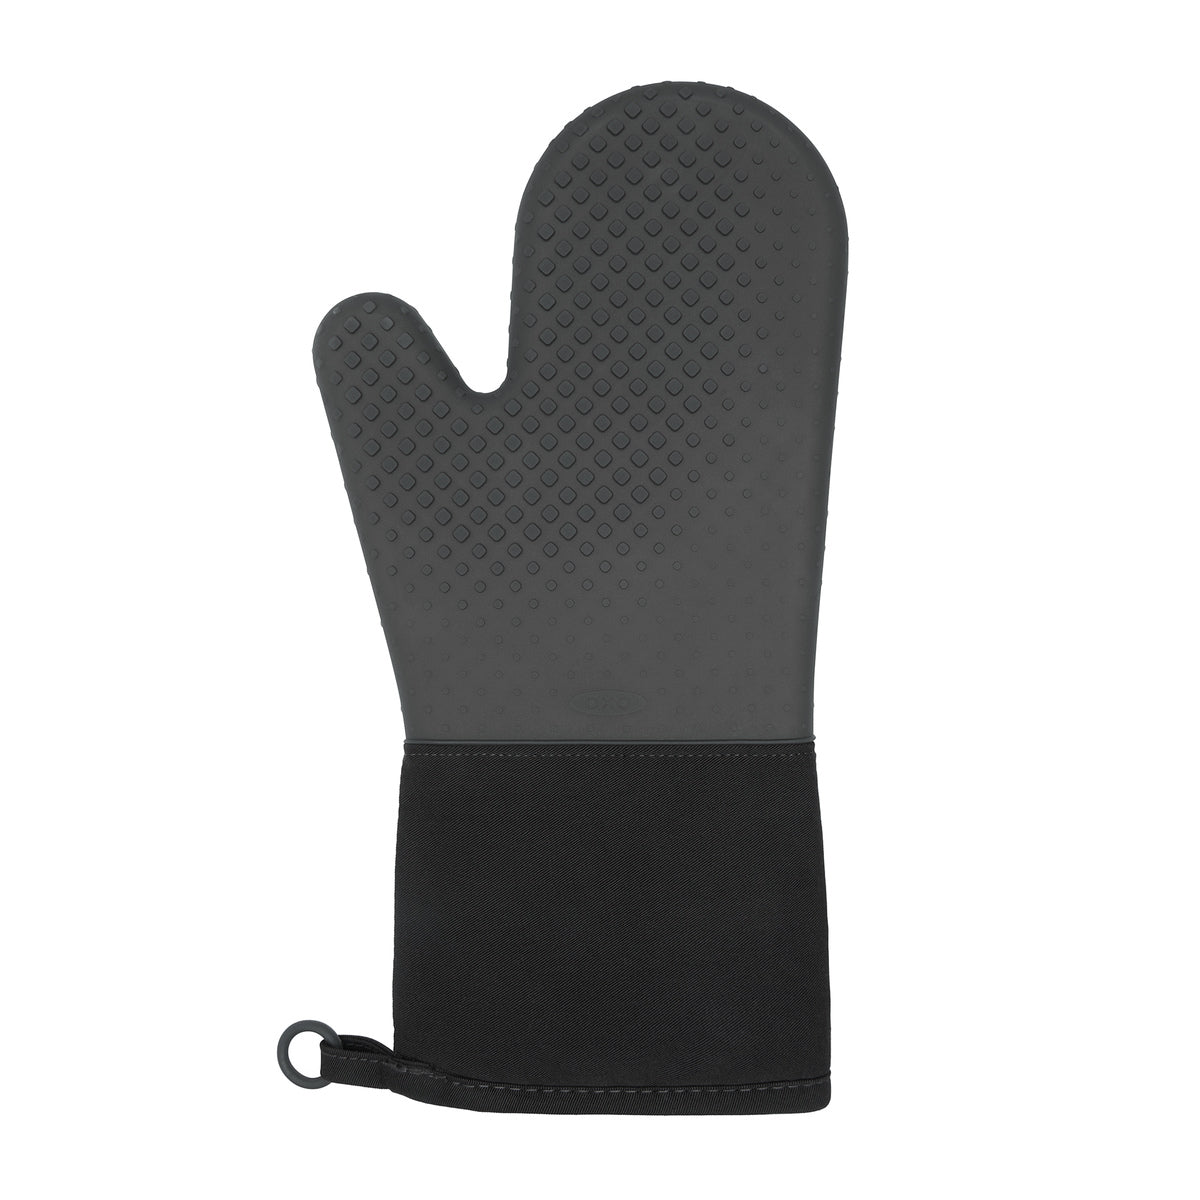 OXO Good Grips 11219800 Silicone Oven Mitt, Black, 13 – Toolbox Supply